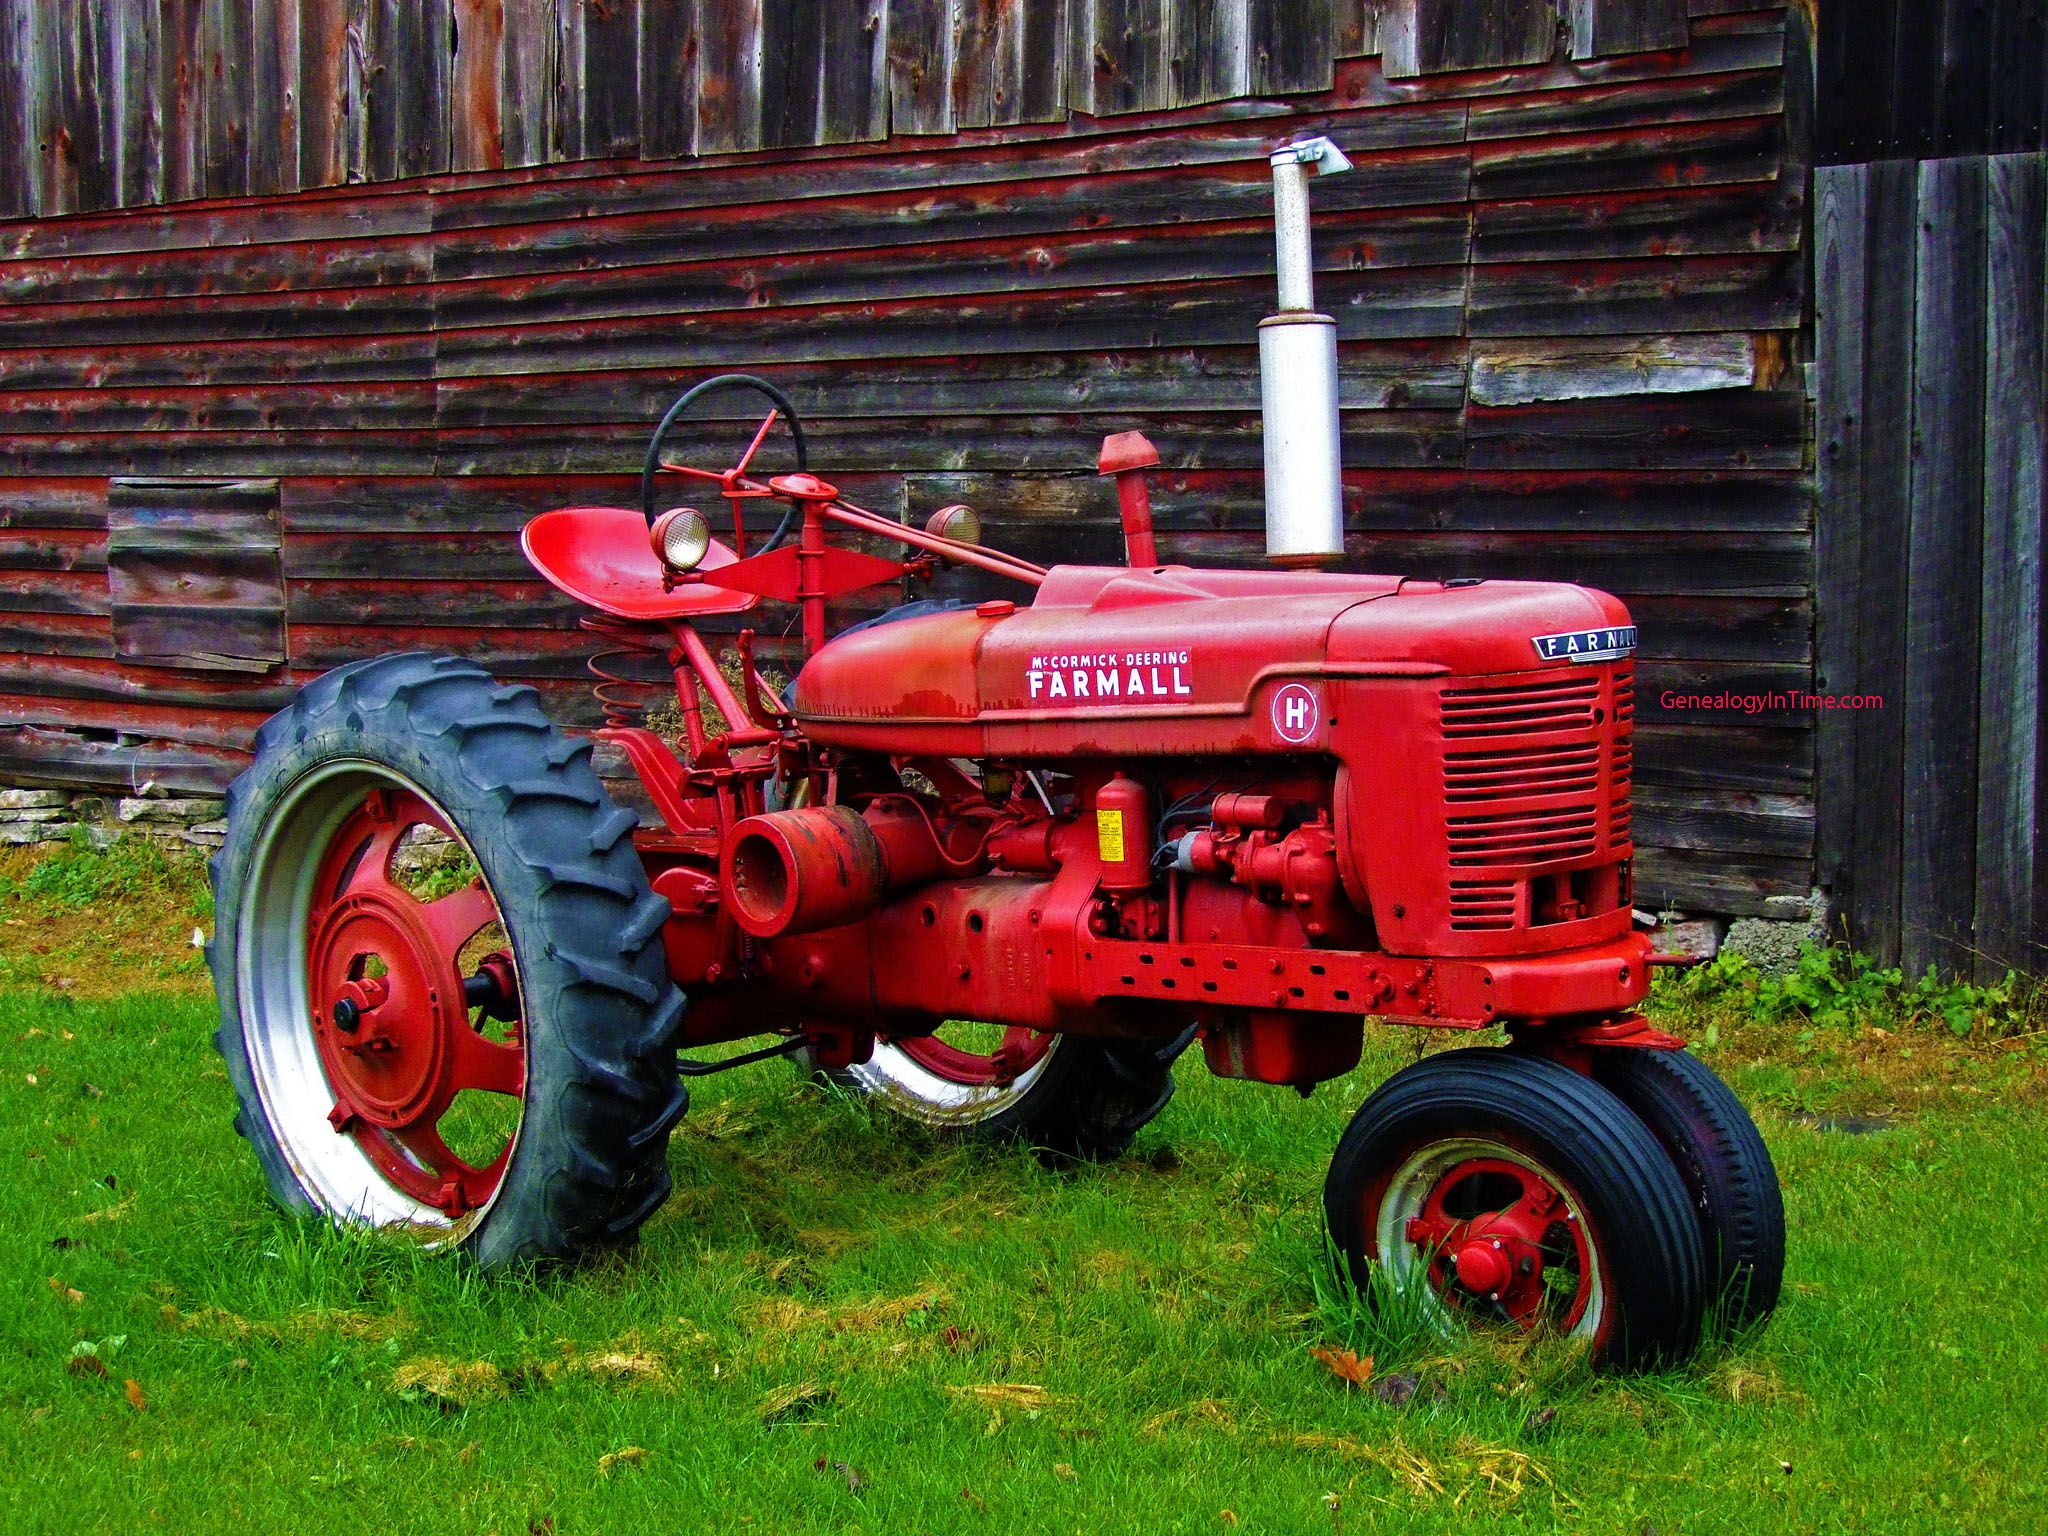 2 Farmall Tractor HD Wallpapers | Backgrounds - Wallpaper Abyss